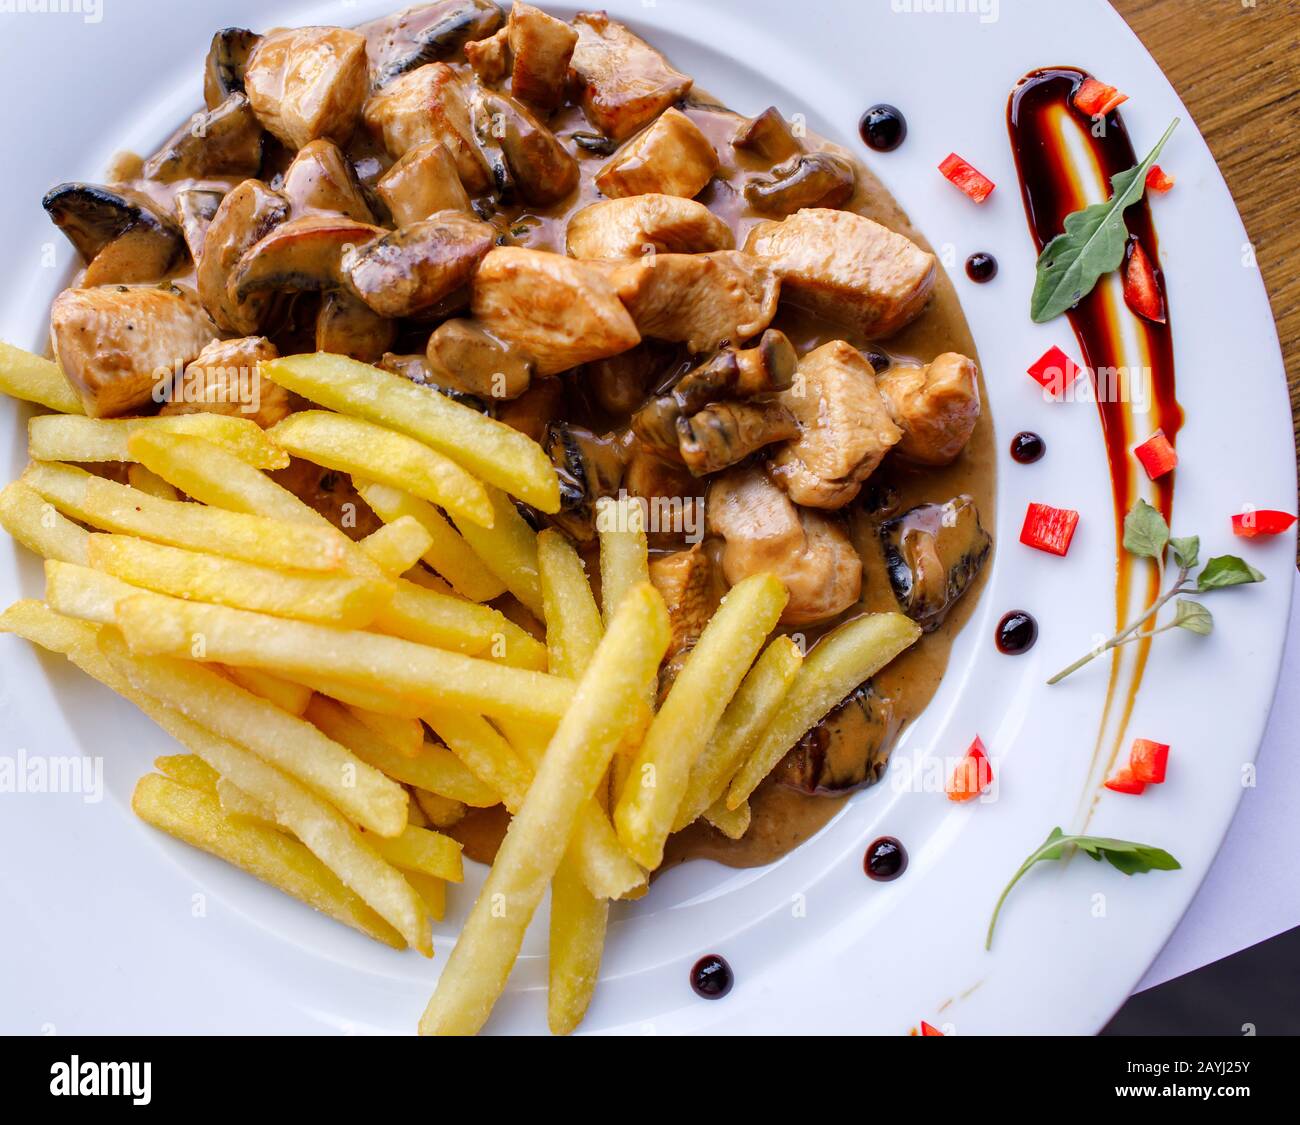 Meat and fries dish served in plate at restaurant Stock Photo